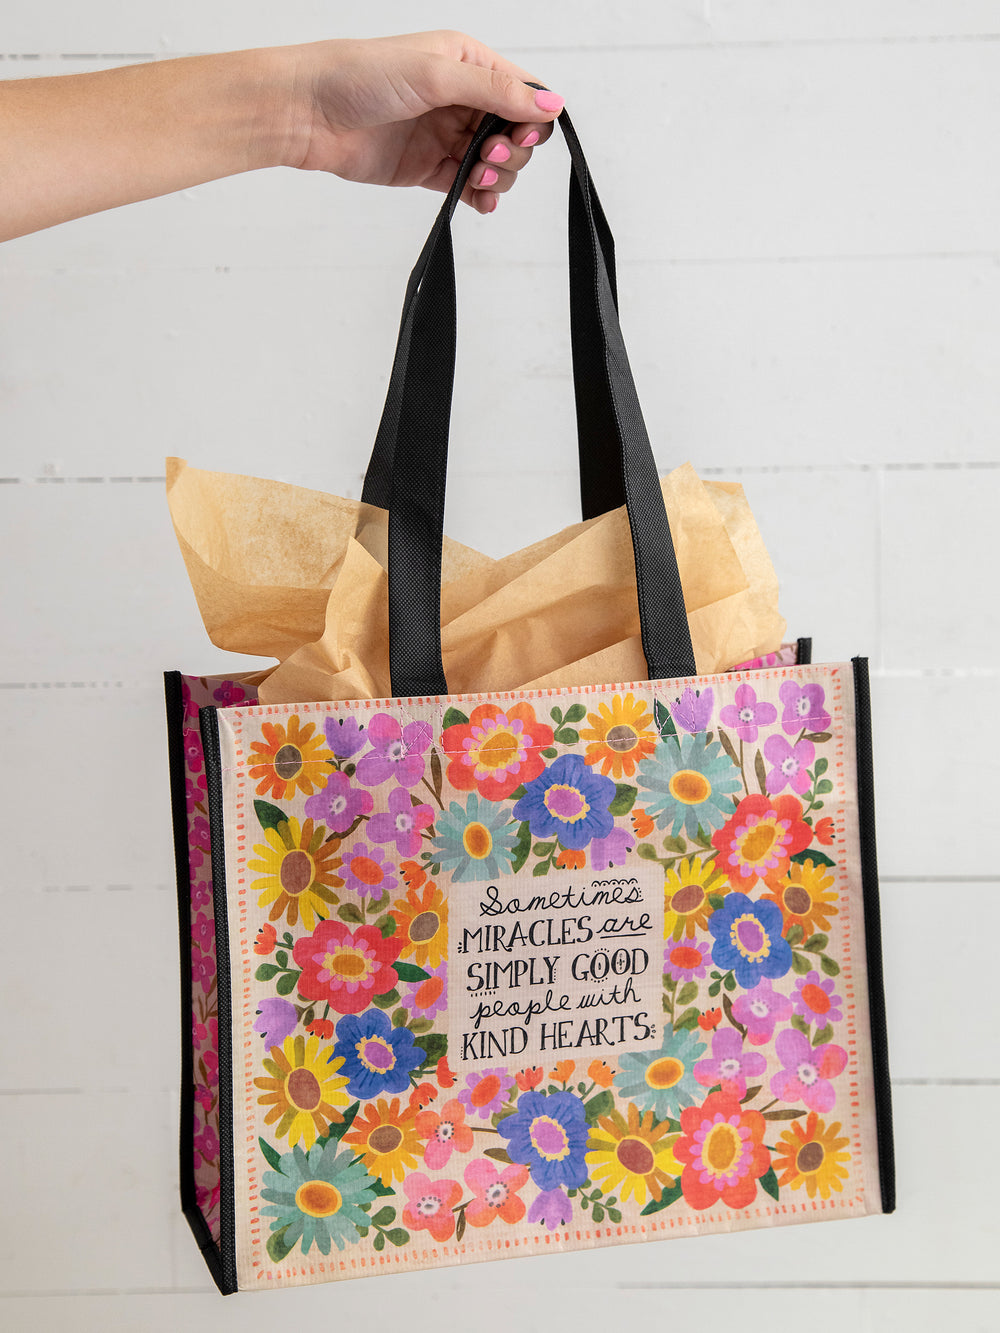 Large Tote - Sometimes Miracles are Good people with Kind Hearts Bag